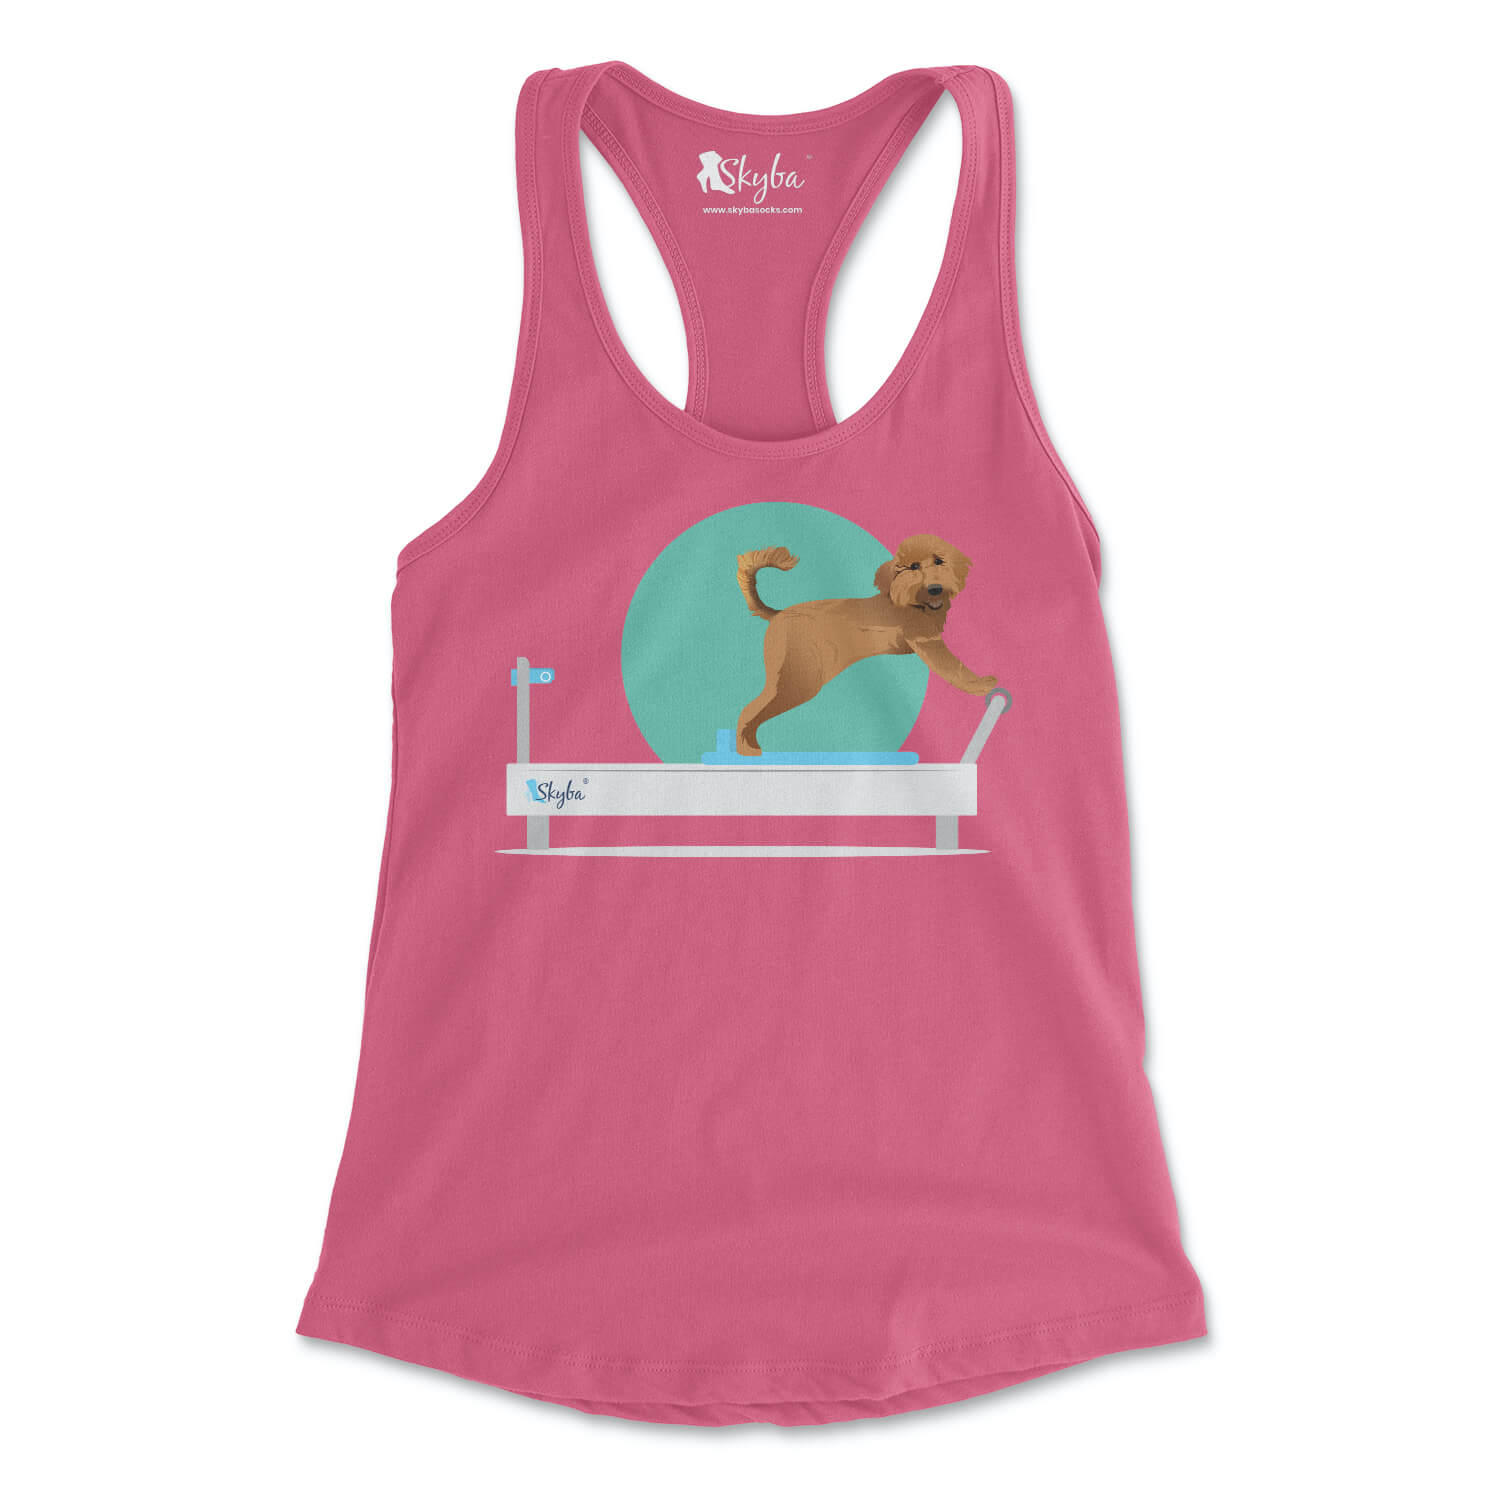 Goldendoodle on Reformer - Women's Slim Fit Tank Skyba Tank Top